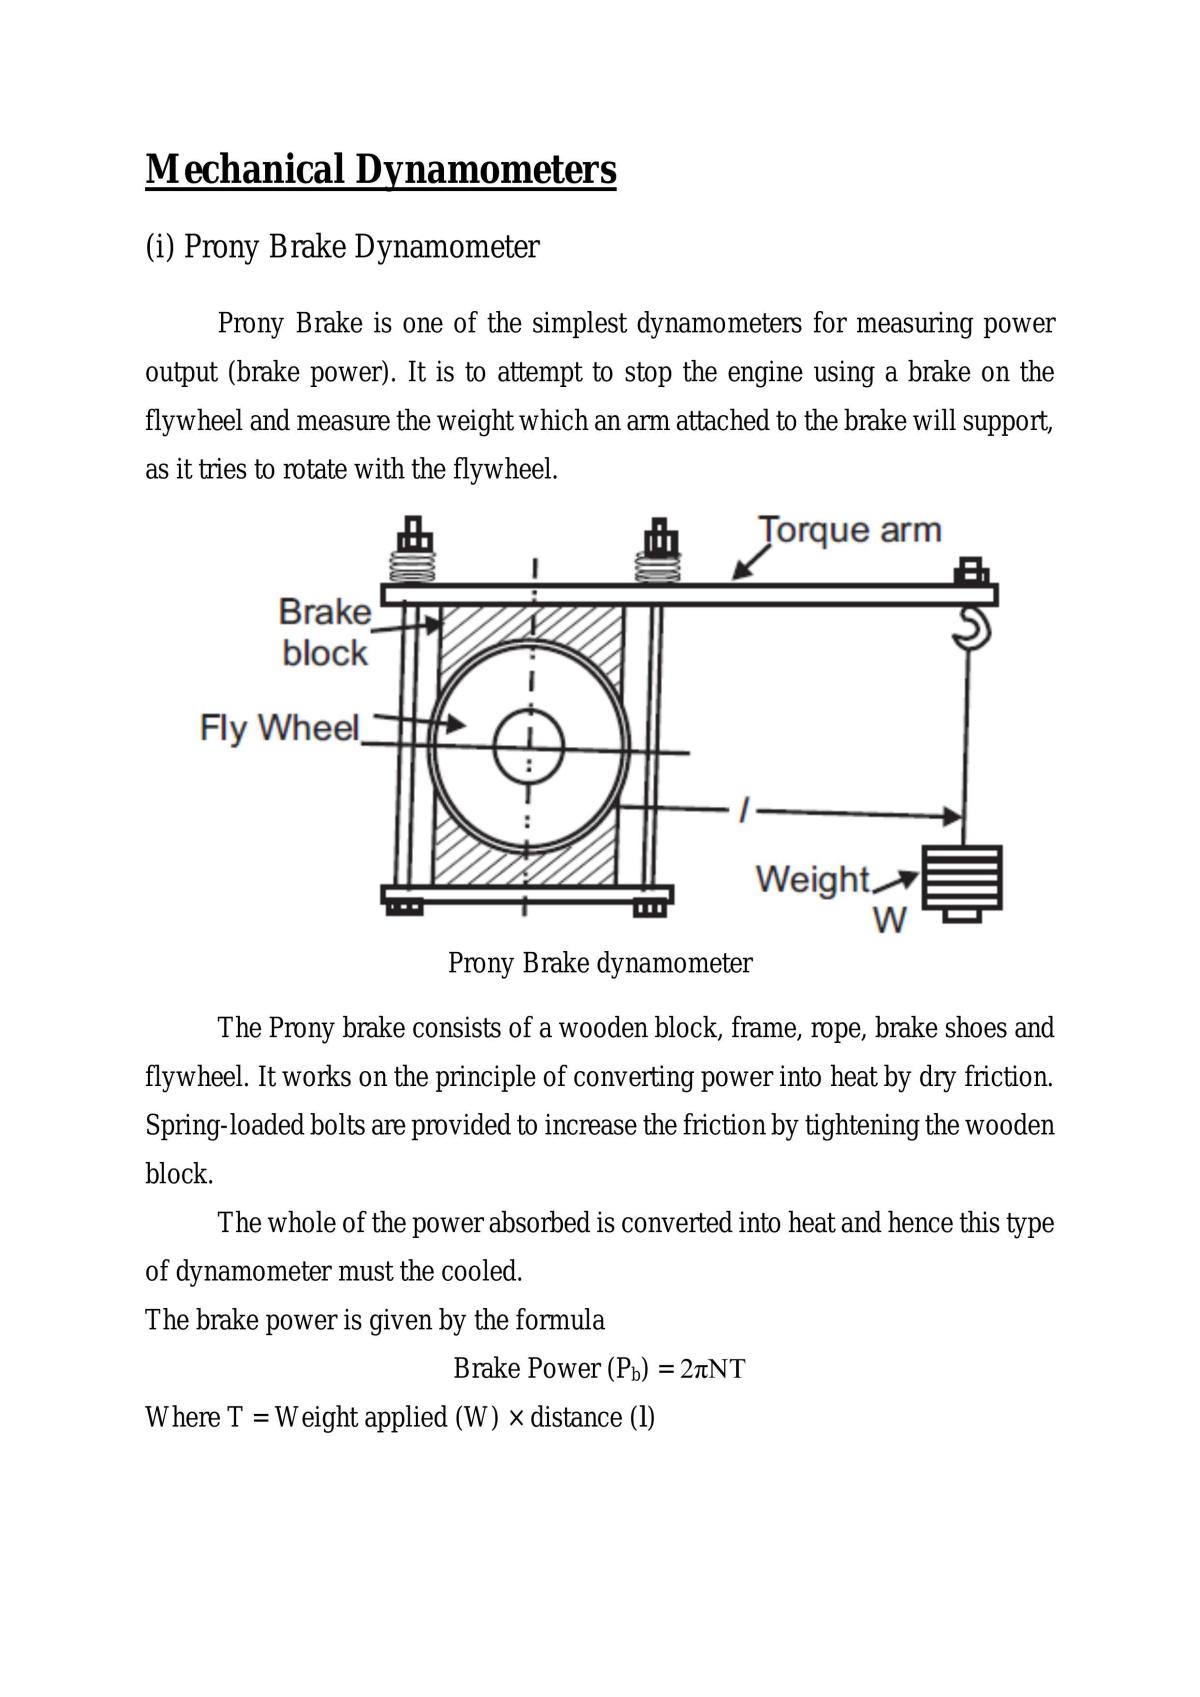 Additional Information of the Three Different Type of Absorption Dynamometer - Page 1